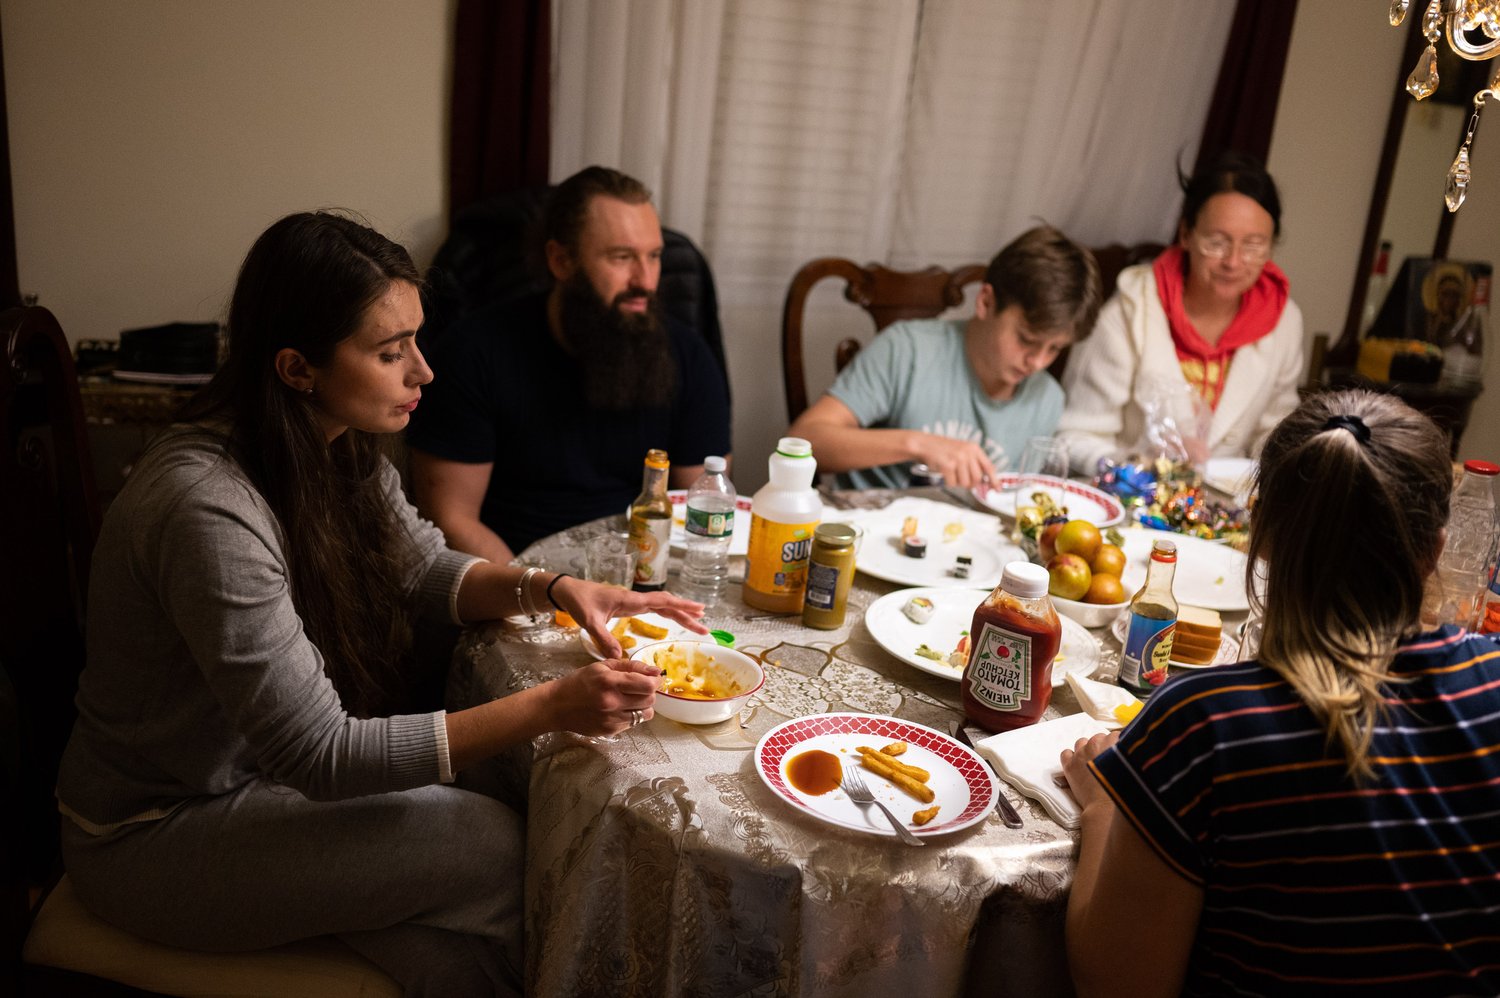   Yuliia Bihun (left) eats at the dinner table with the rest of the Ukrainians she lives with at Saint Nicholas's Church.  